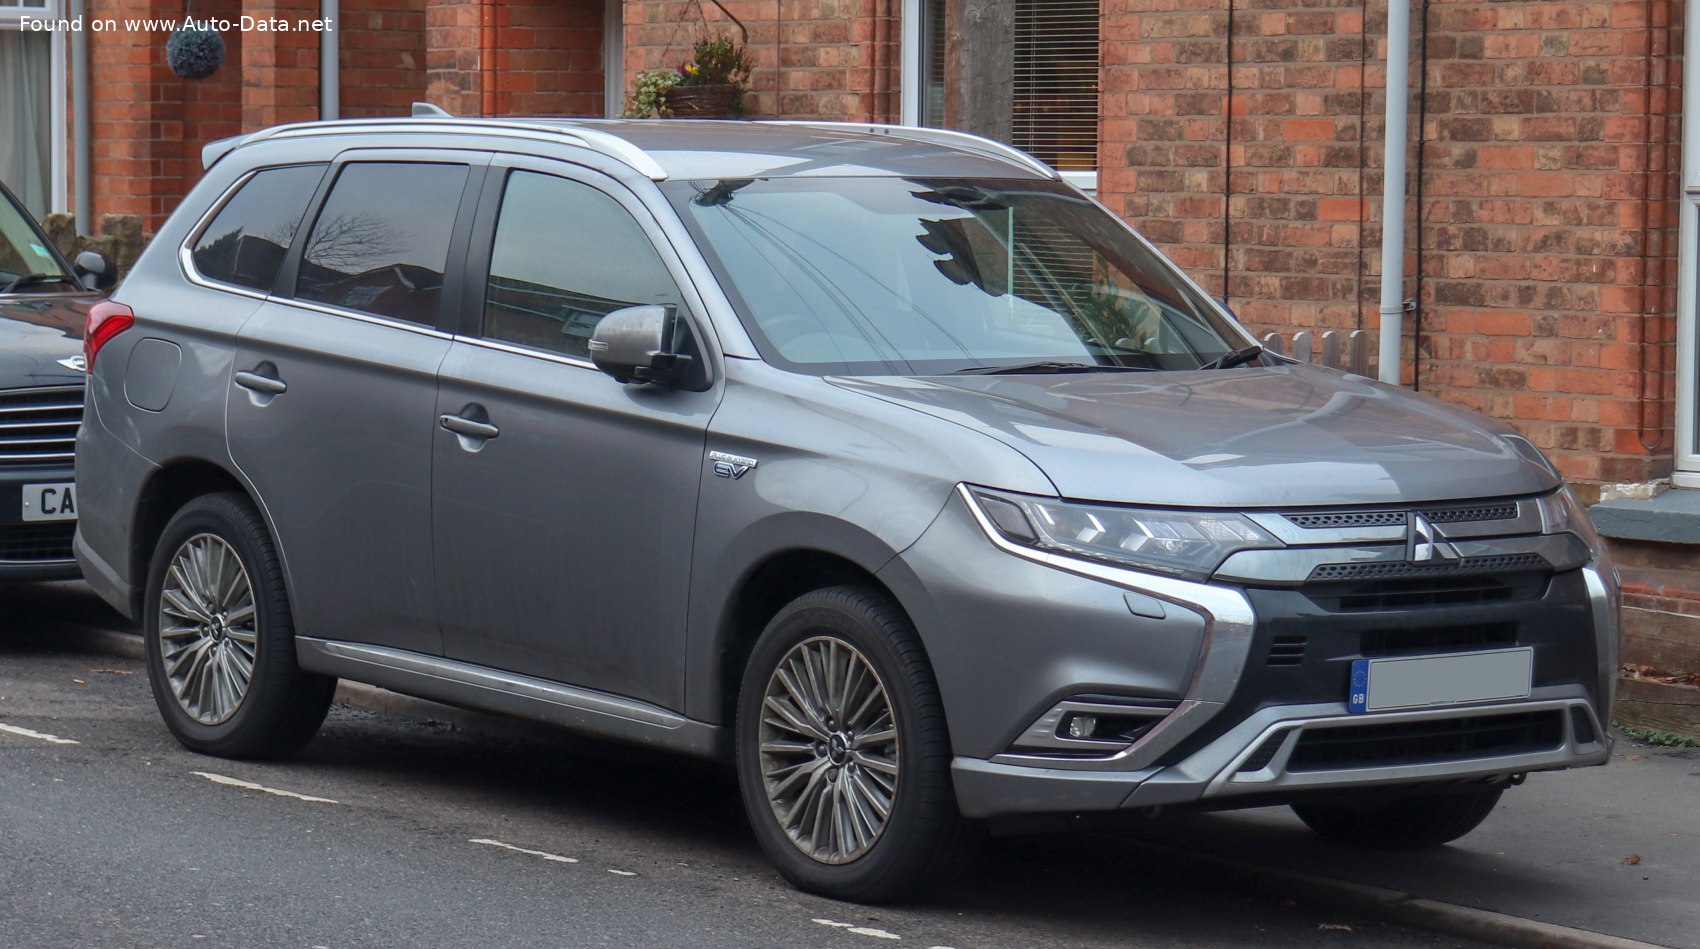 2018 Mitsubishi Outlander III (facelift 2018) 2.4 MIVEC (224 PS) Plug-in  Hybrid 4WD